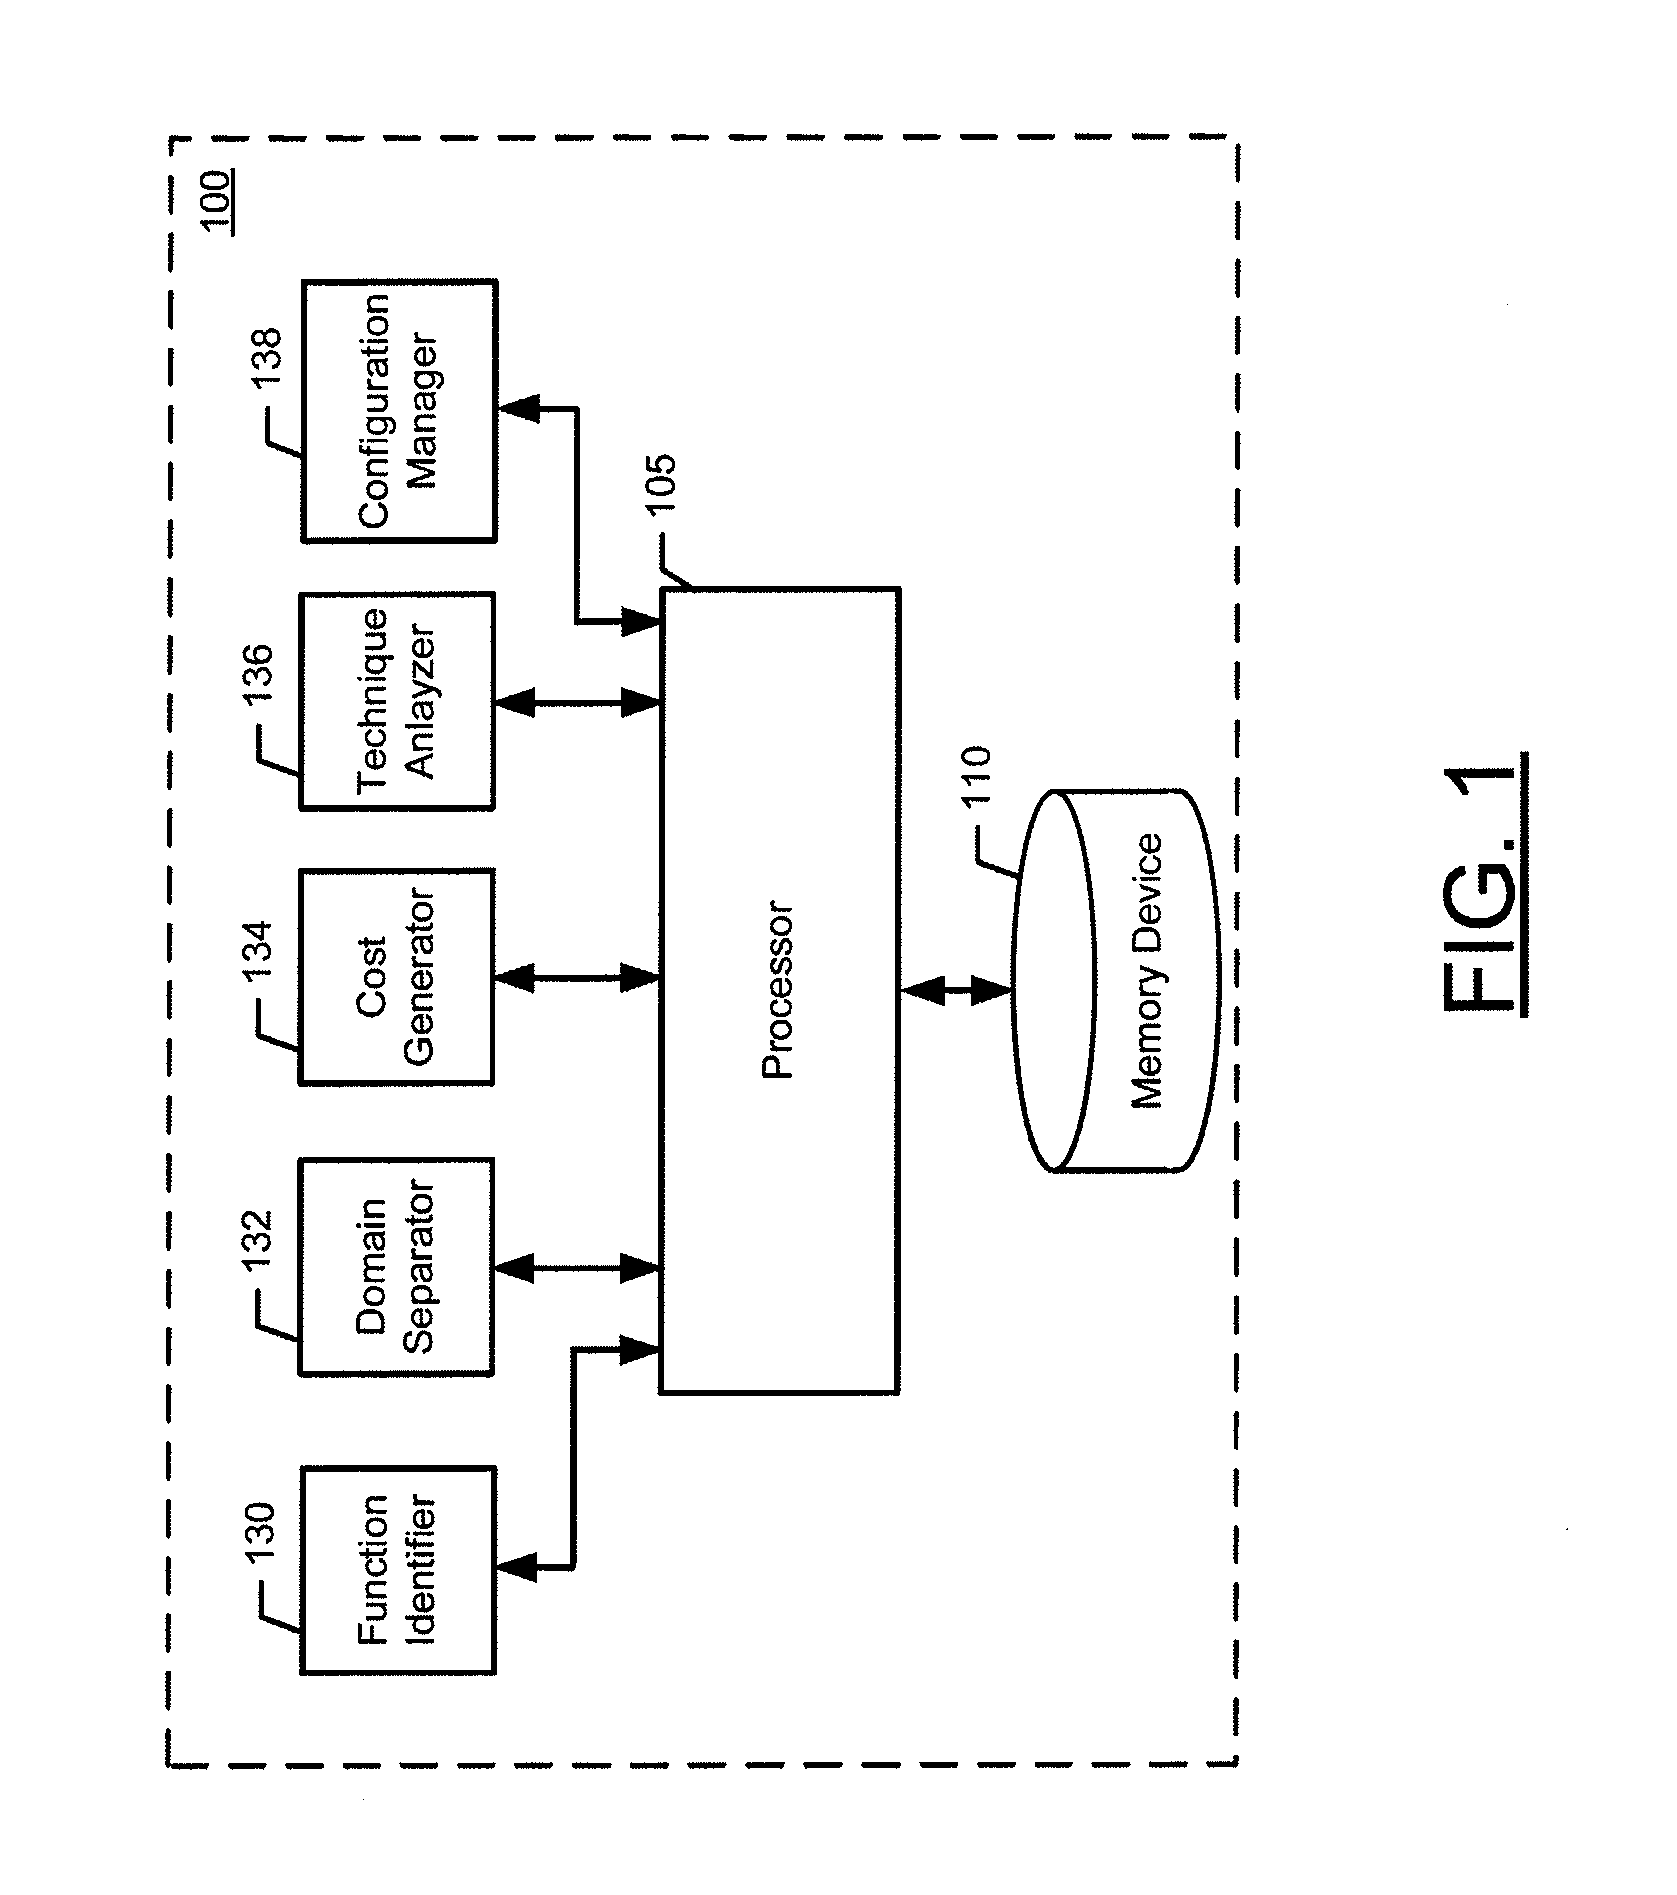 Method, apparatus, and computer program product for resource, time, and cost aware variable-precision solving of mathematical functions